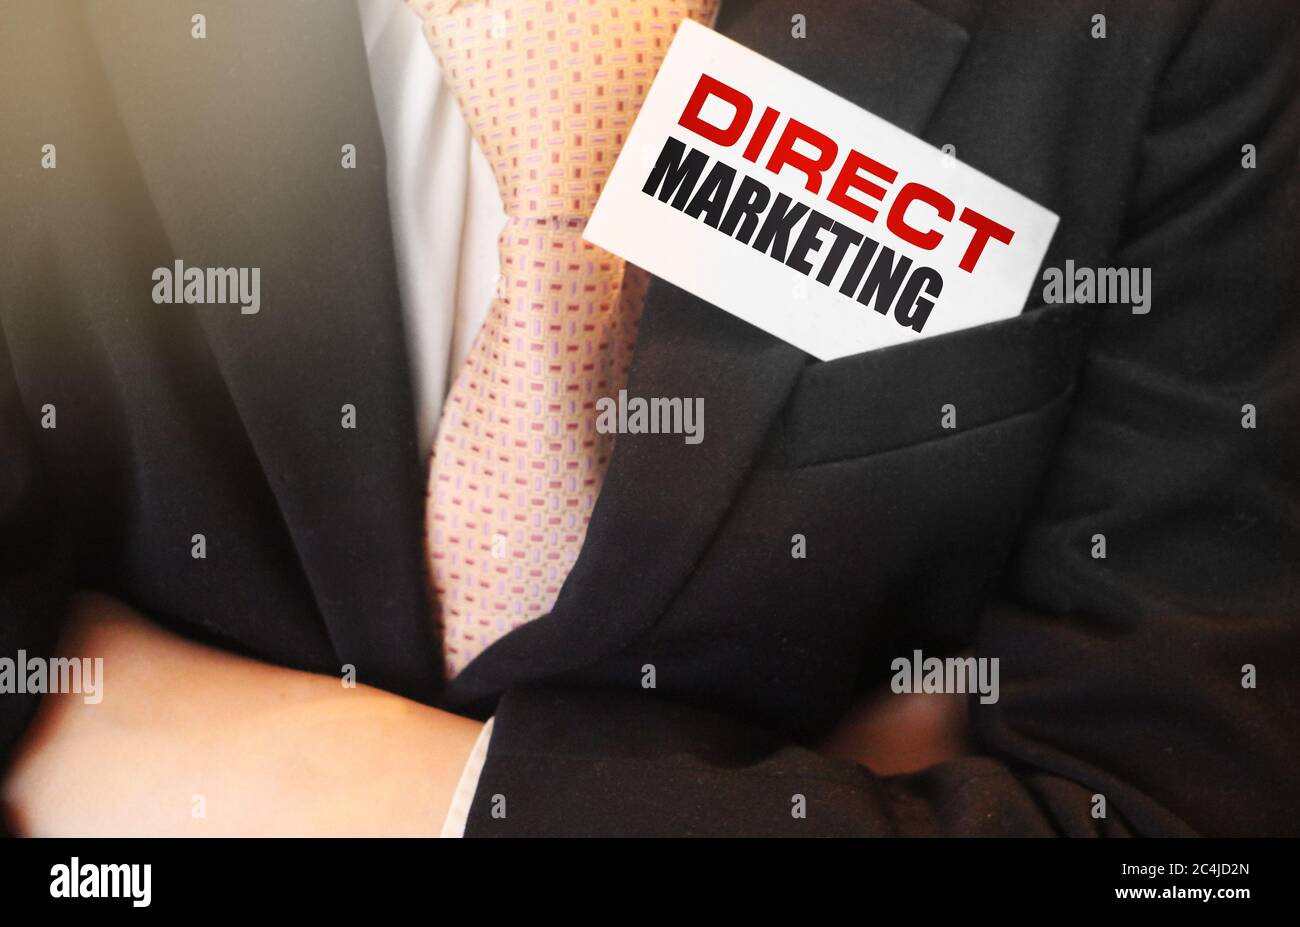 Direct marketing words on card in hand of businessman wearing suit and tie.  Alternative marketing business concept Stock Photo - Alamy